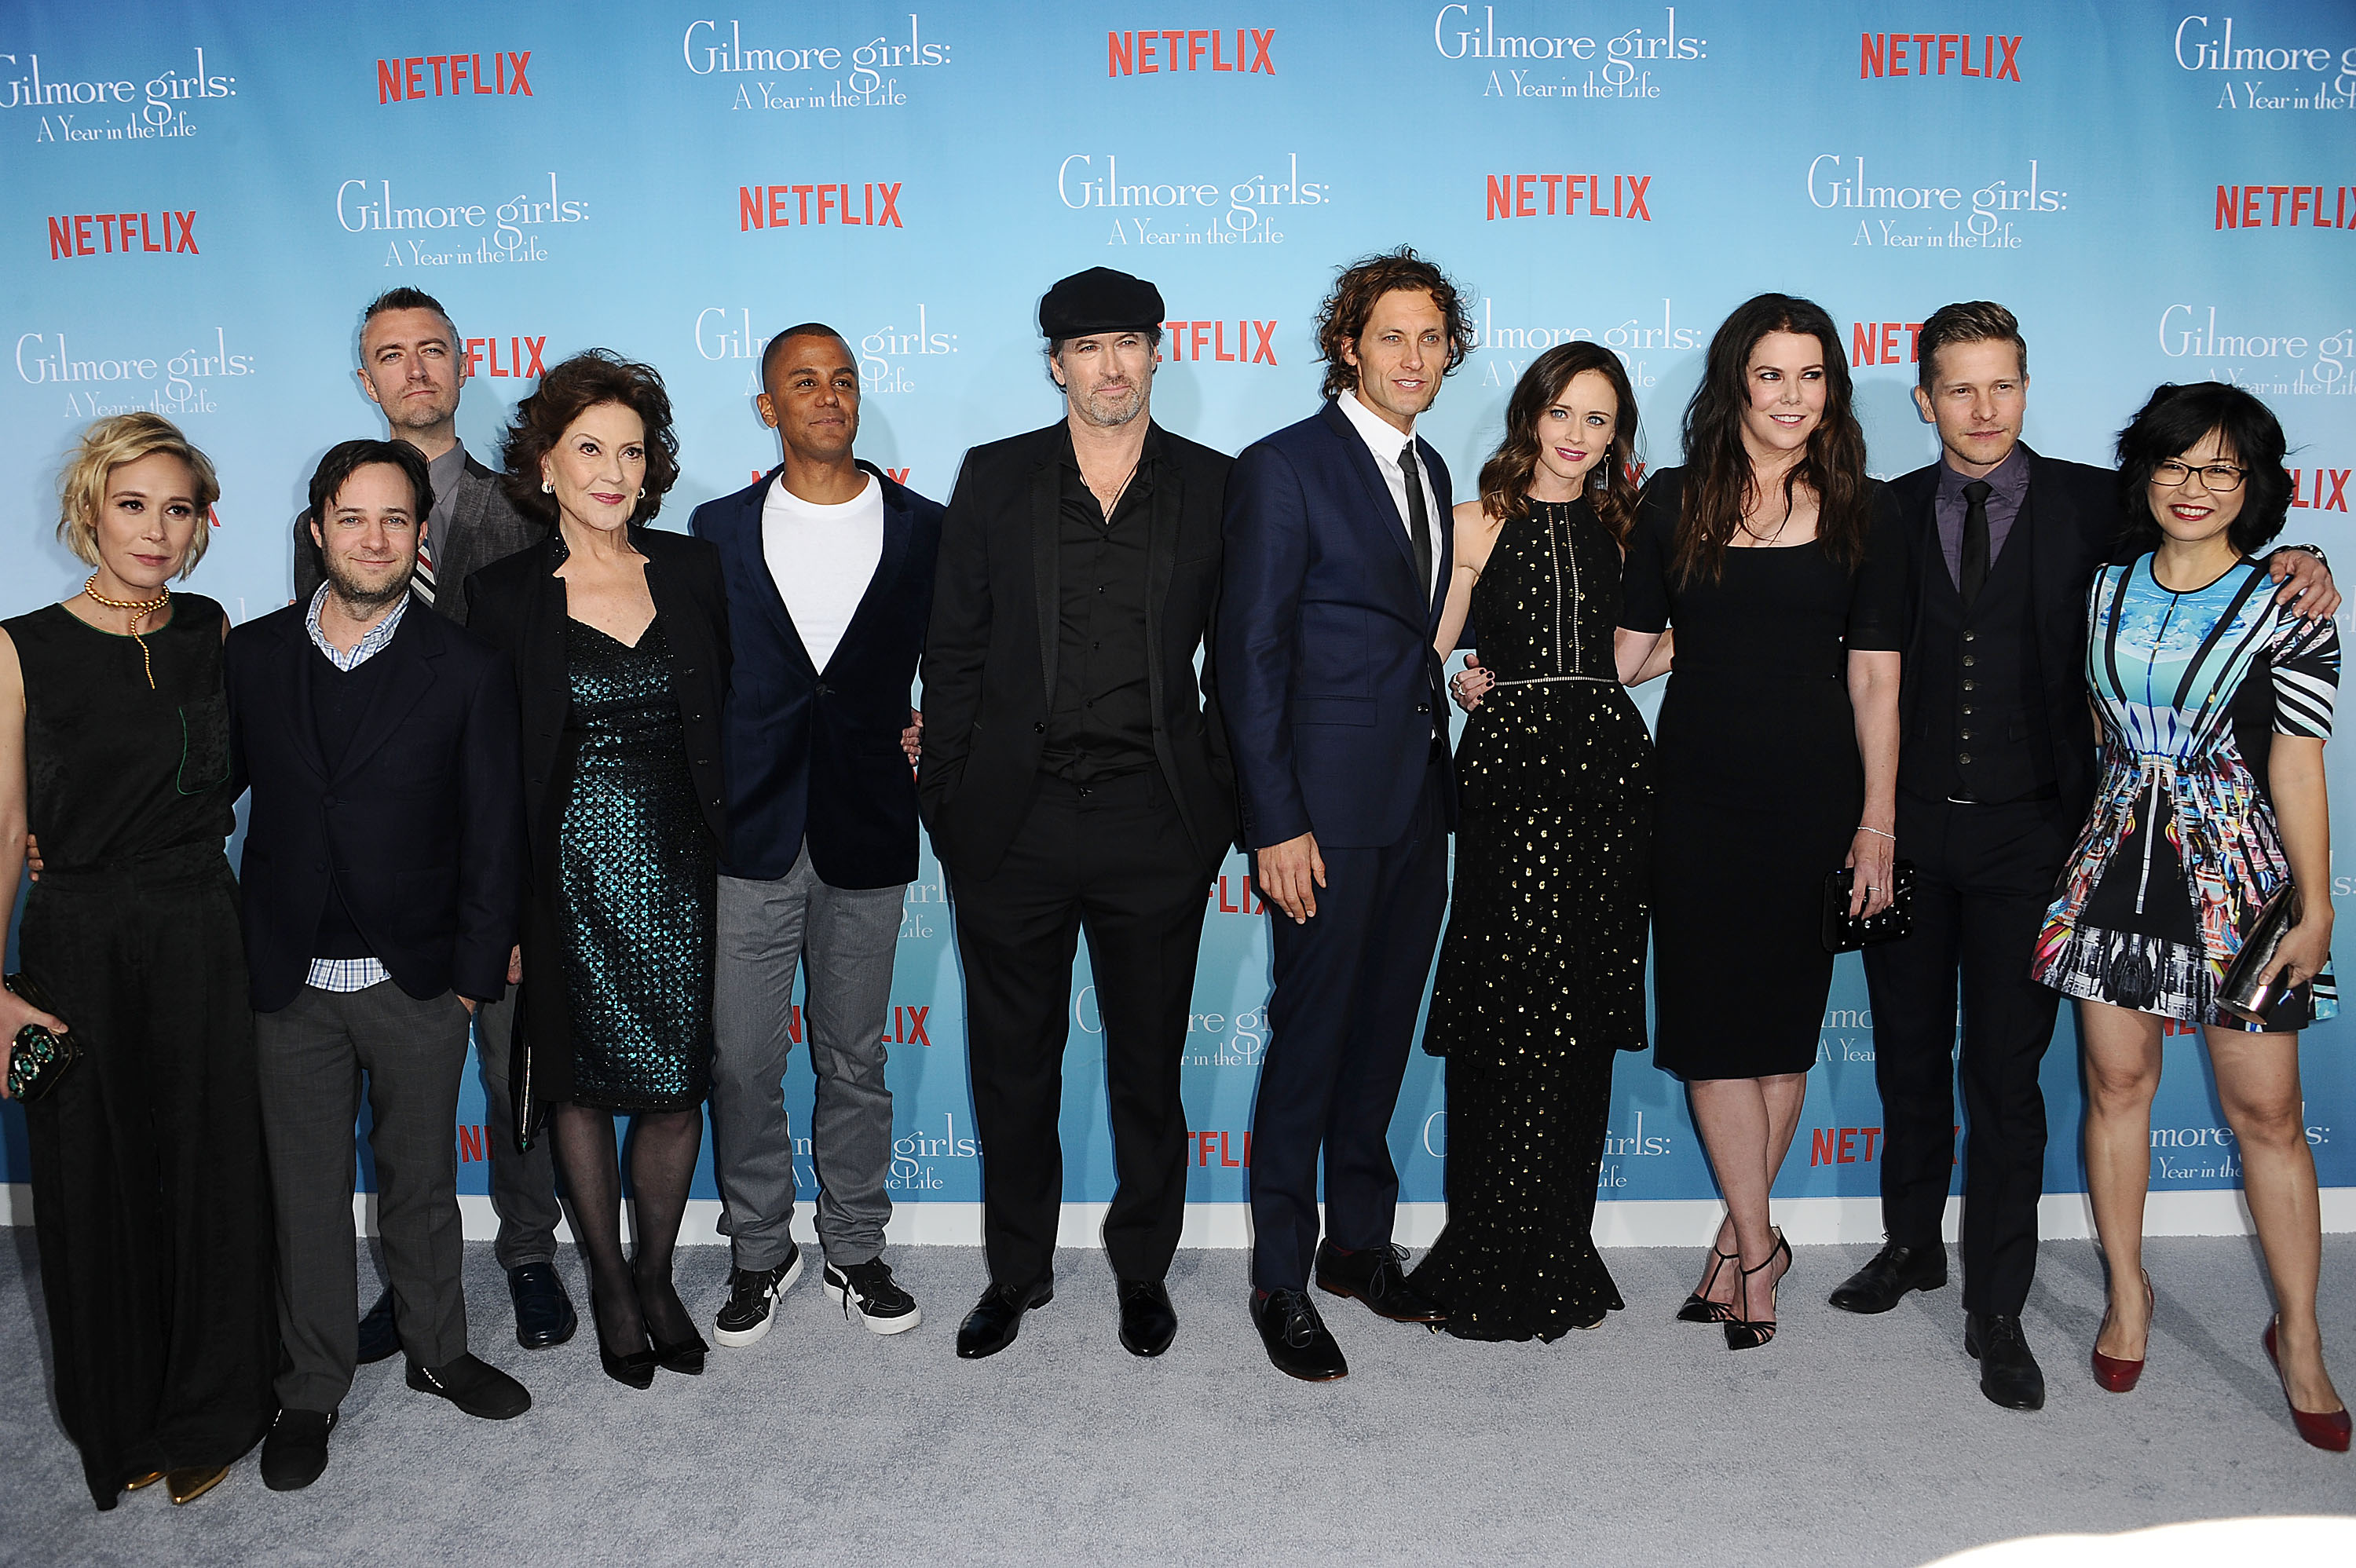 Liza Well, Danny Strong, Sean Gunn, Kelly Bishop, Yanic Truesdale, Scott Patterson, Tanc Sade, Alexis Bledel, Lauren Graham, Matt Czuchry and Keiko Agena attend the premiere of 'Gilmore Girls: A Year in the Life'